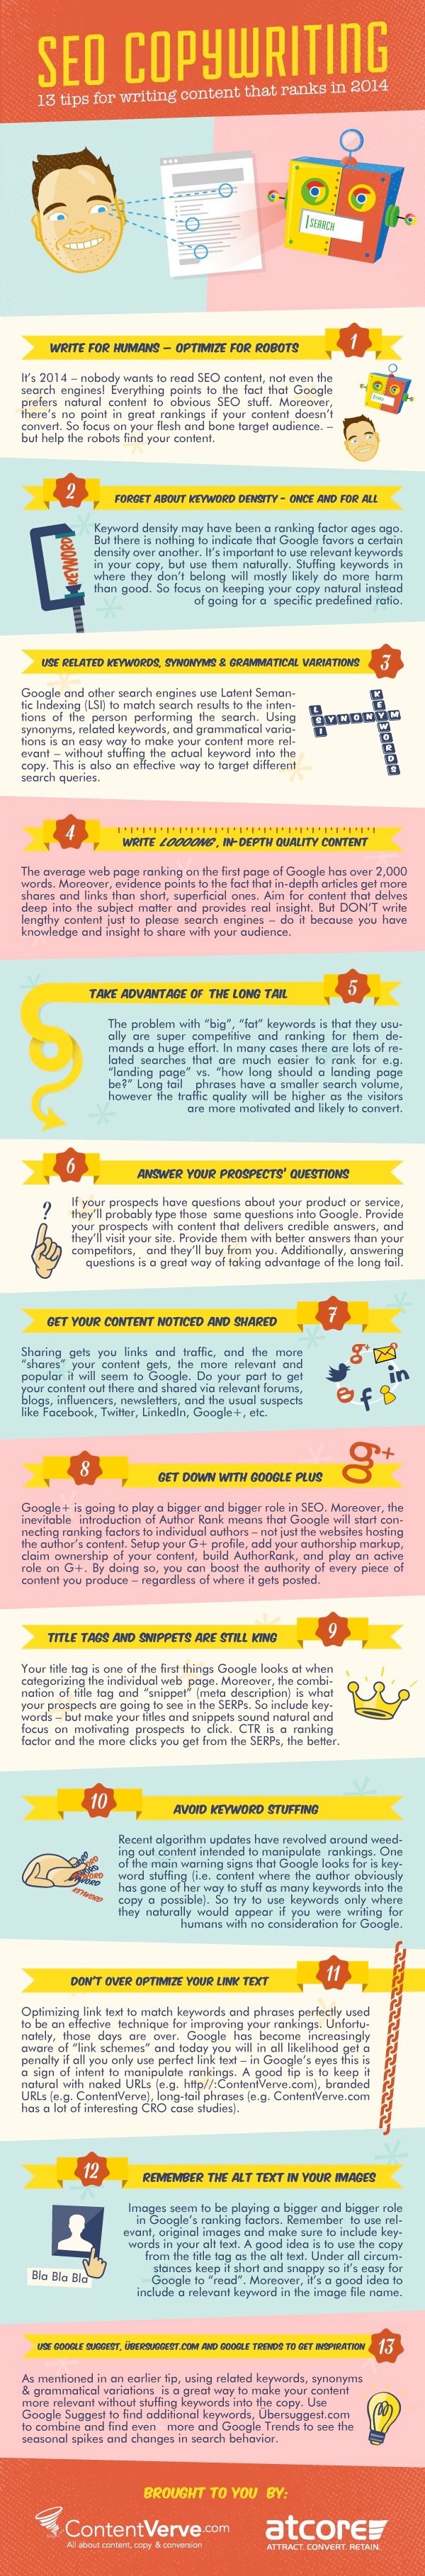 SEO-How-to-write-content-that-ranks-2014_[infographic]